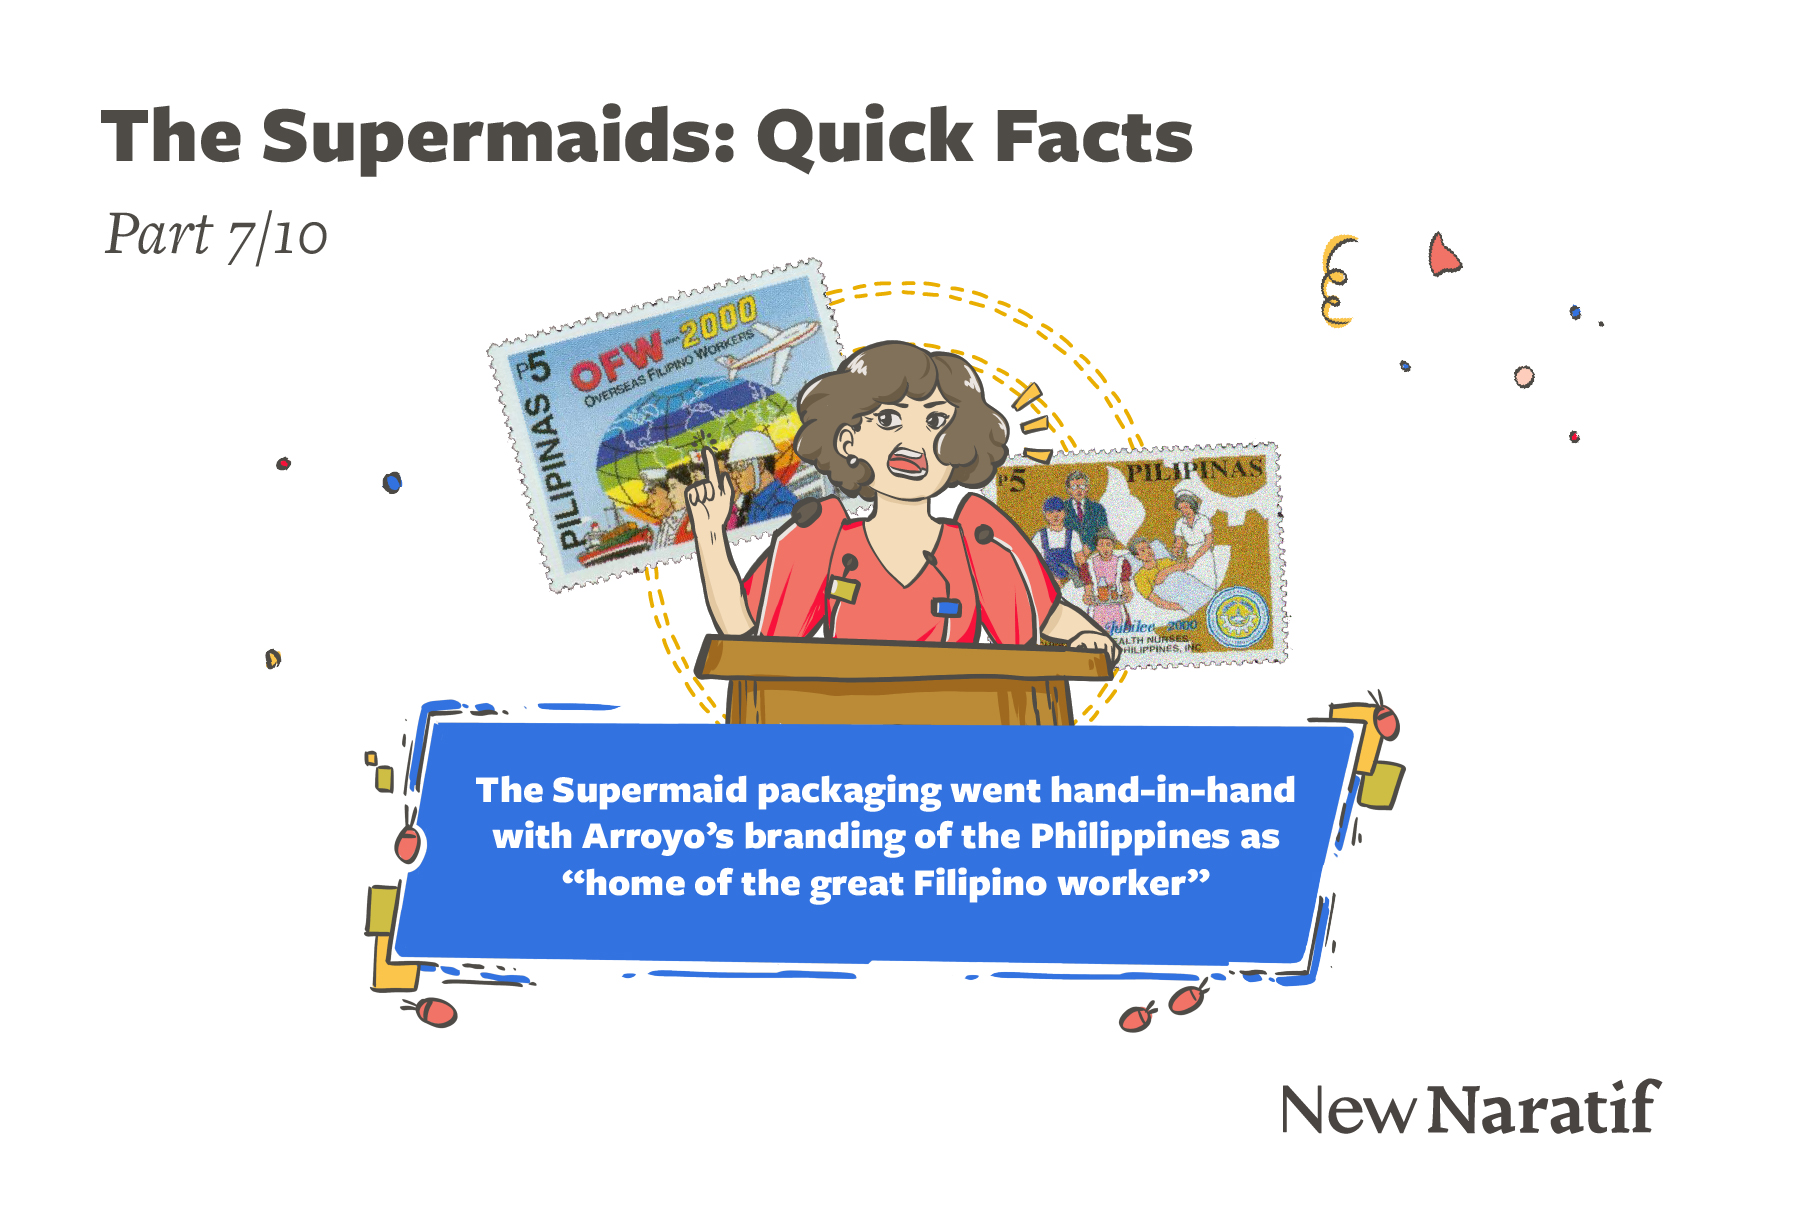 The Supermaid packaging went hand-in-hand with Arroyo’s branding of the Philippines as “home of the great Filipino worker”.